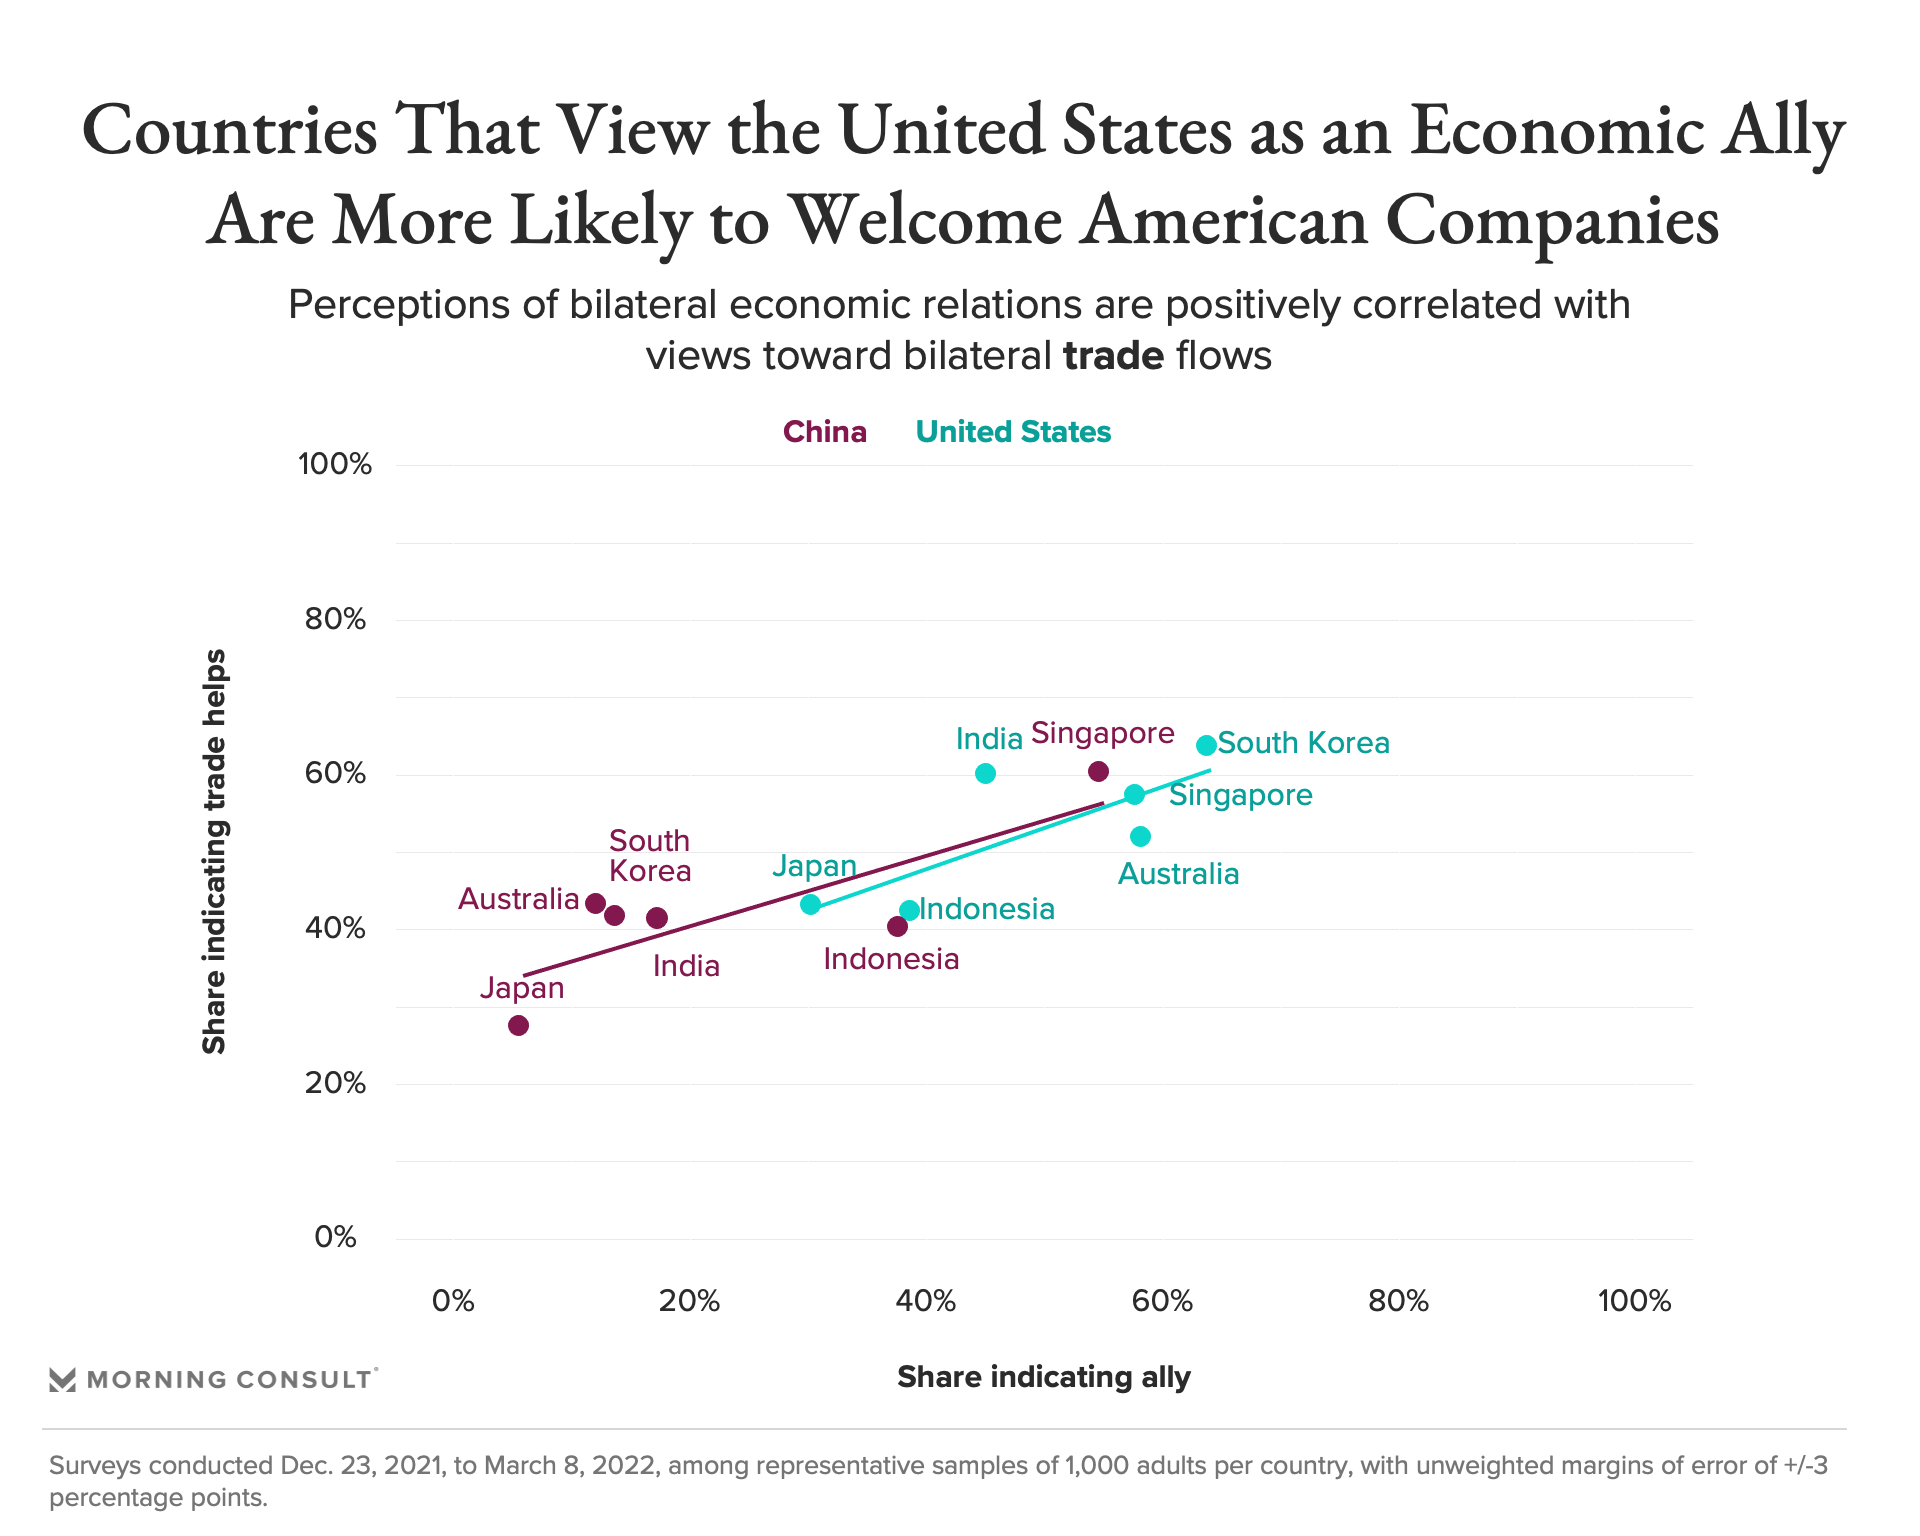 Countries open to welcoming American companies